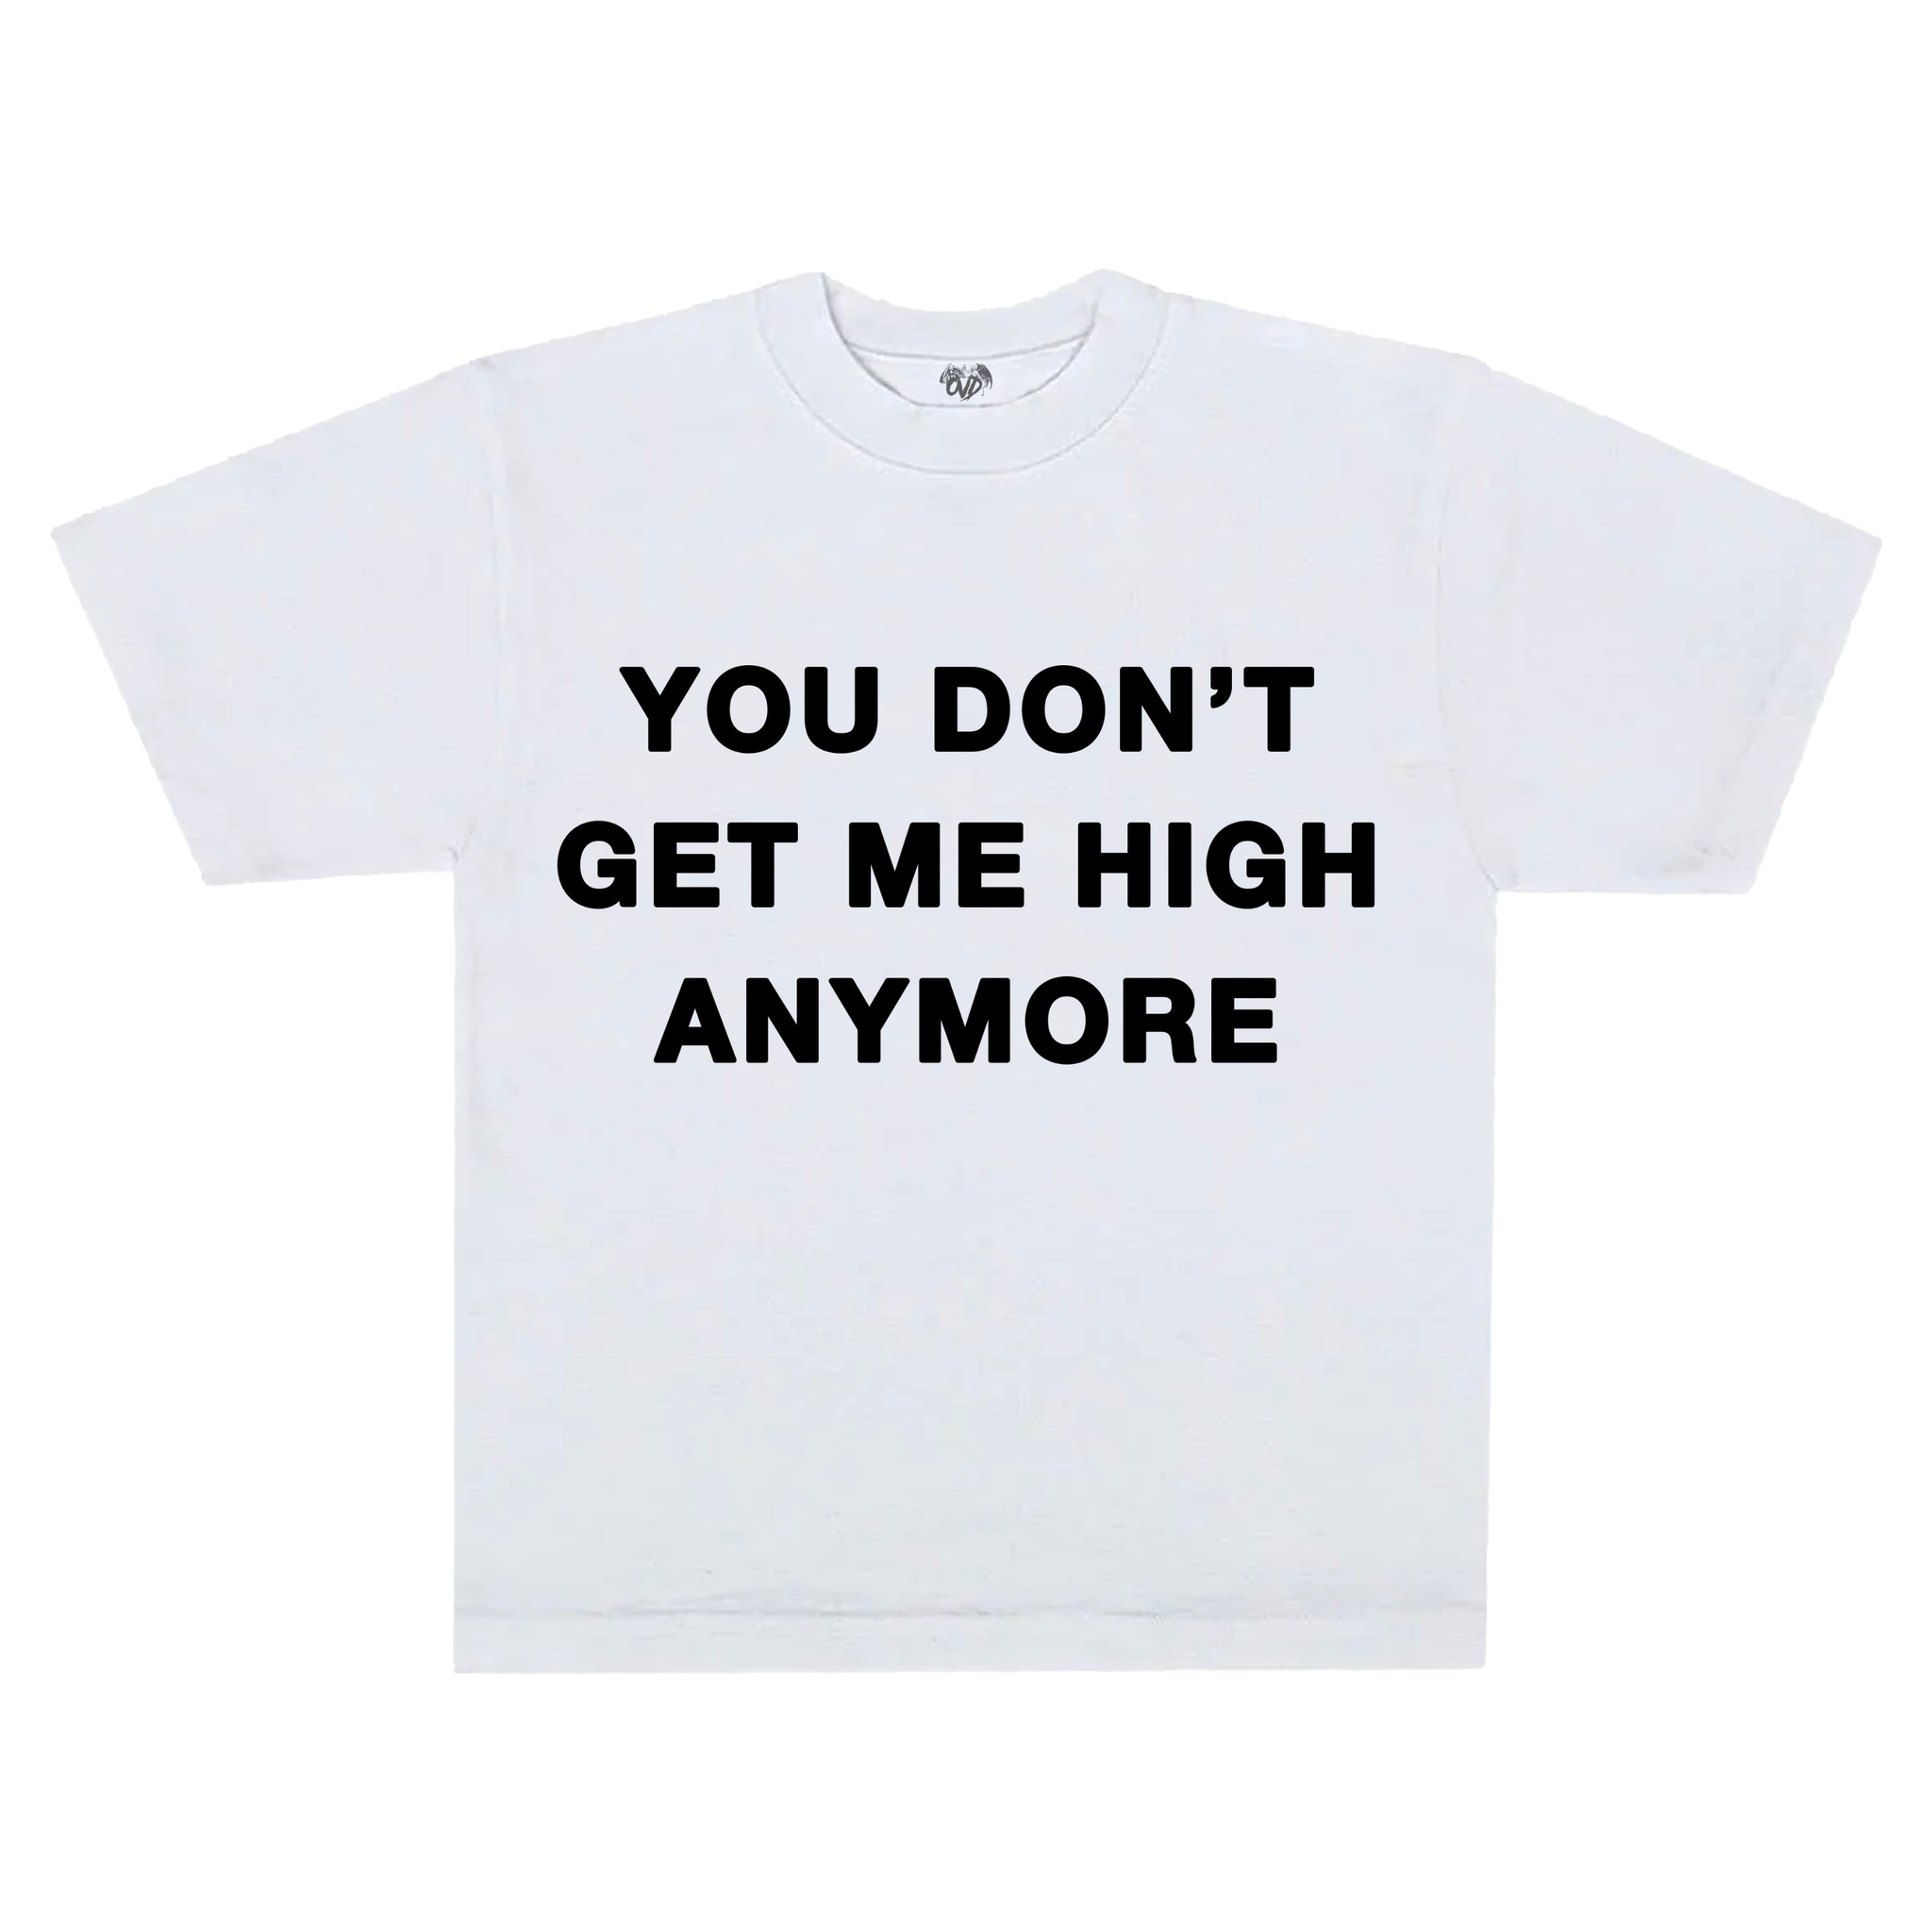 "YOU DON'T GET ME HIGH ANYMORE" - WHITE TEE